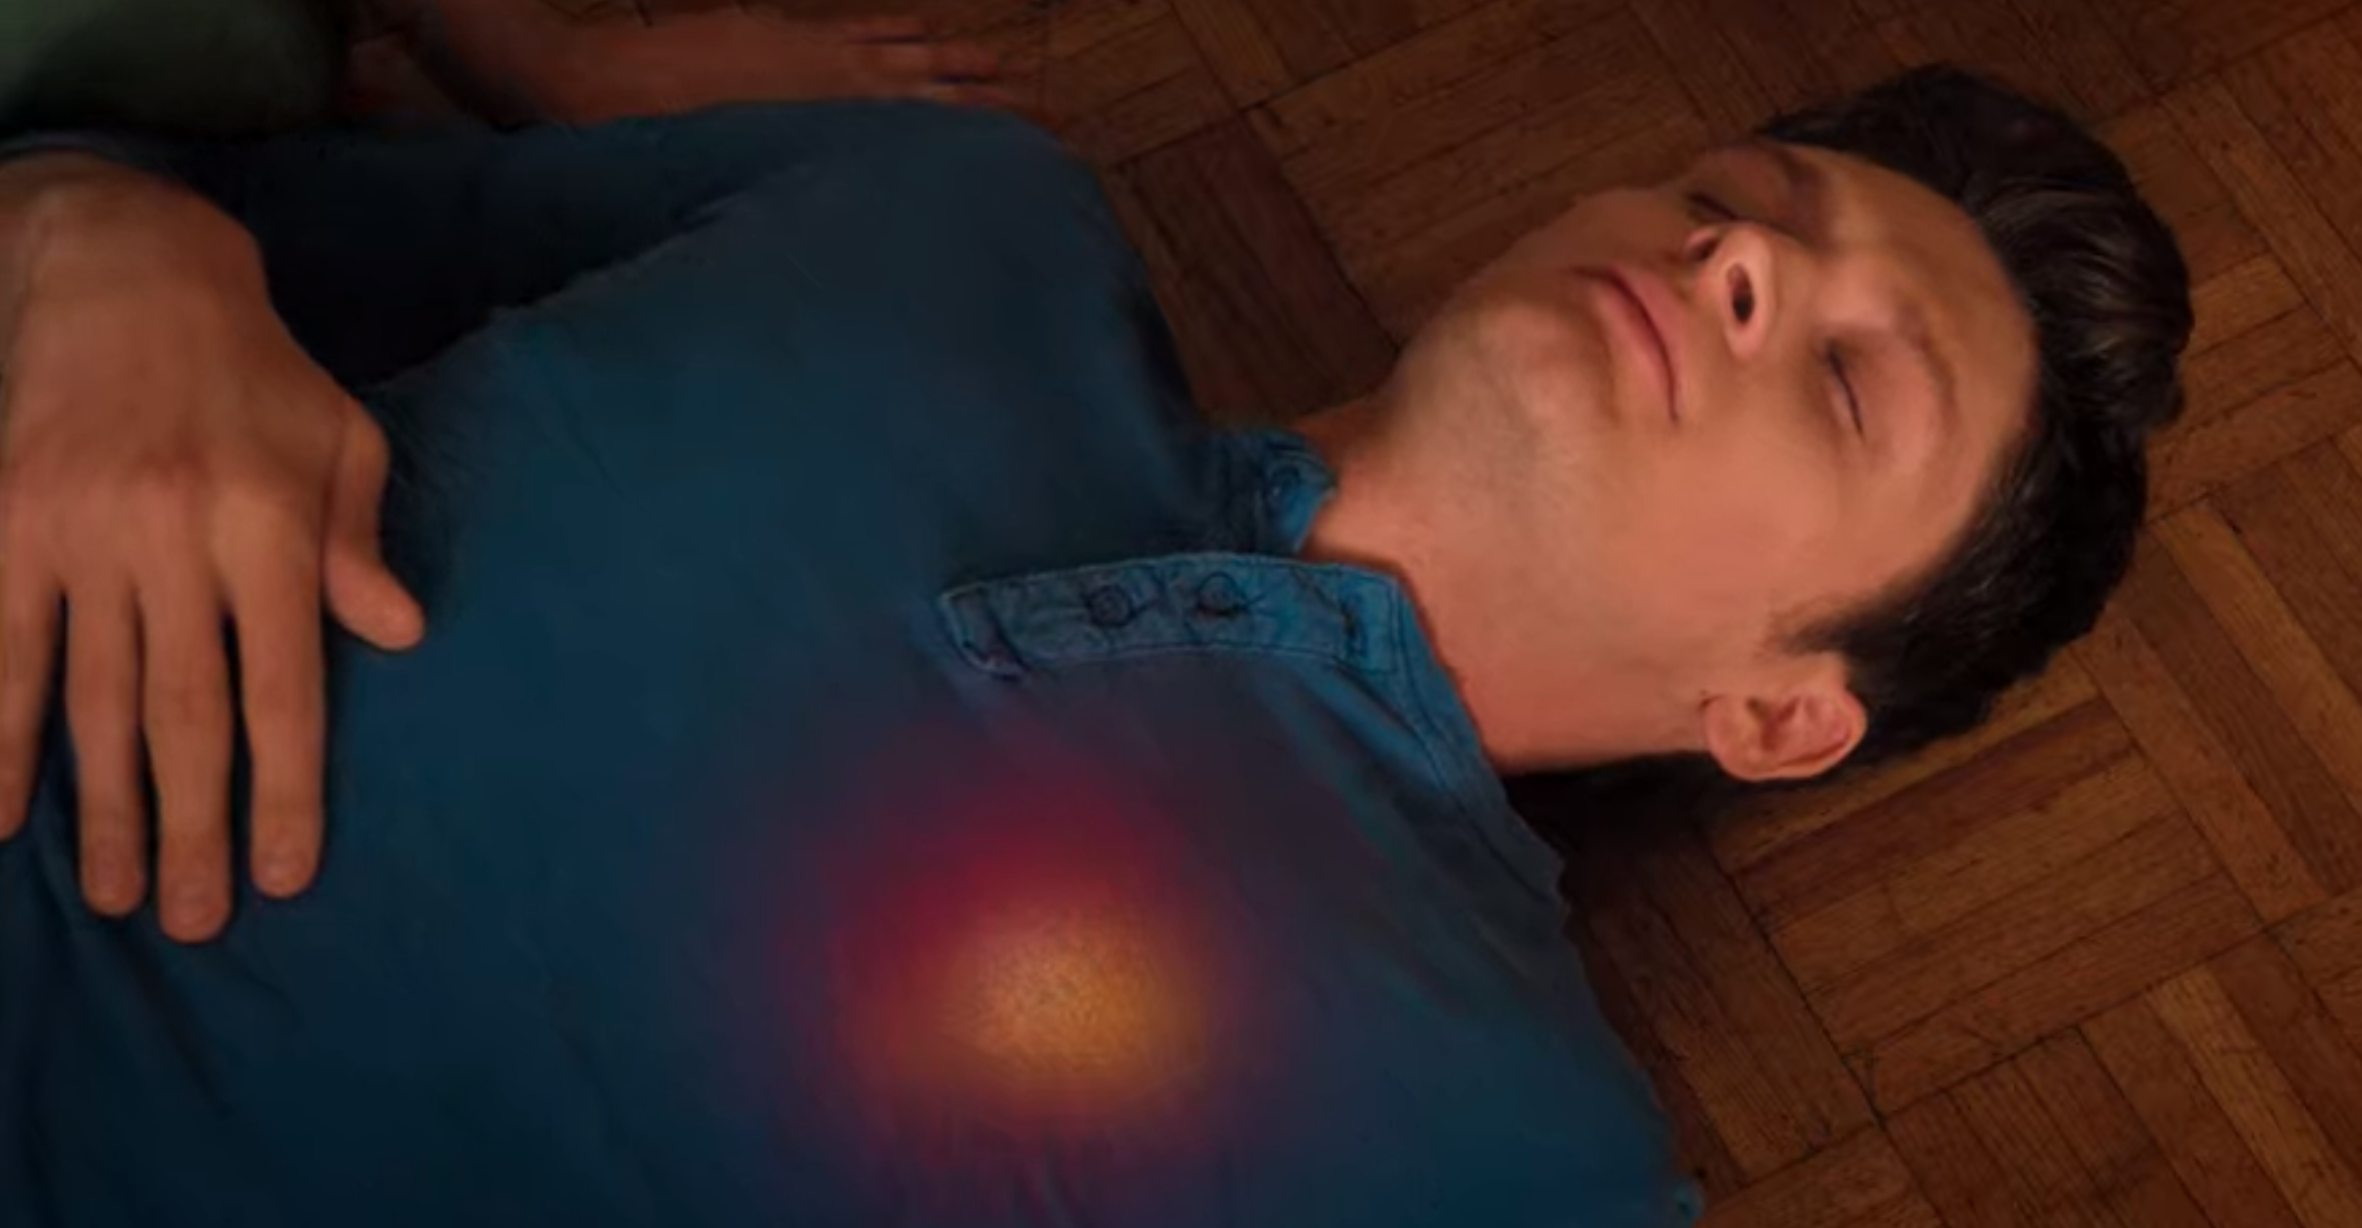 A man lies on the ground with his heart area glowing